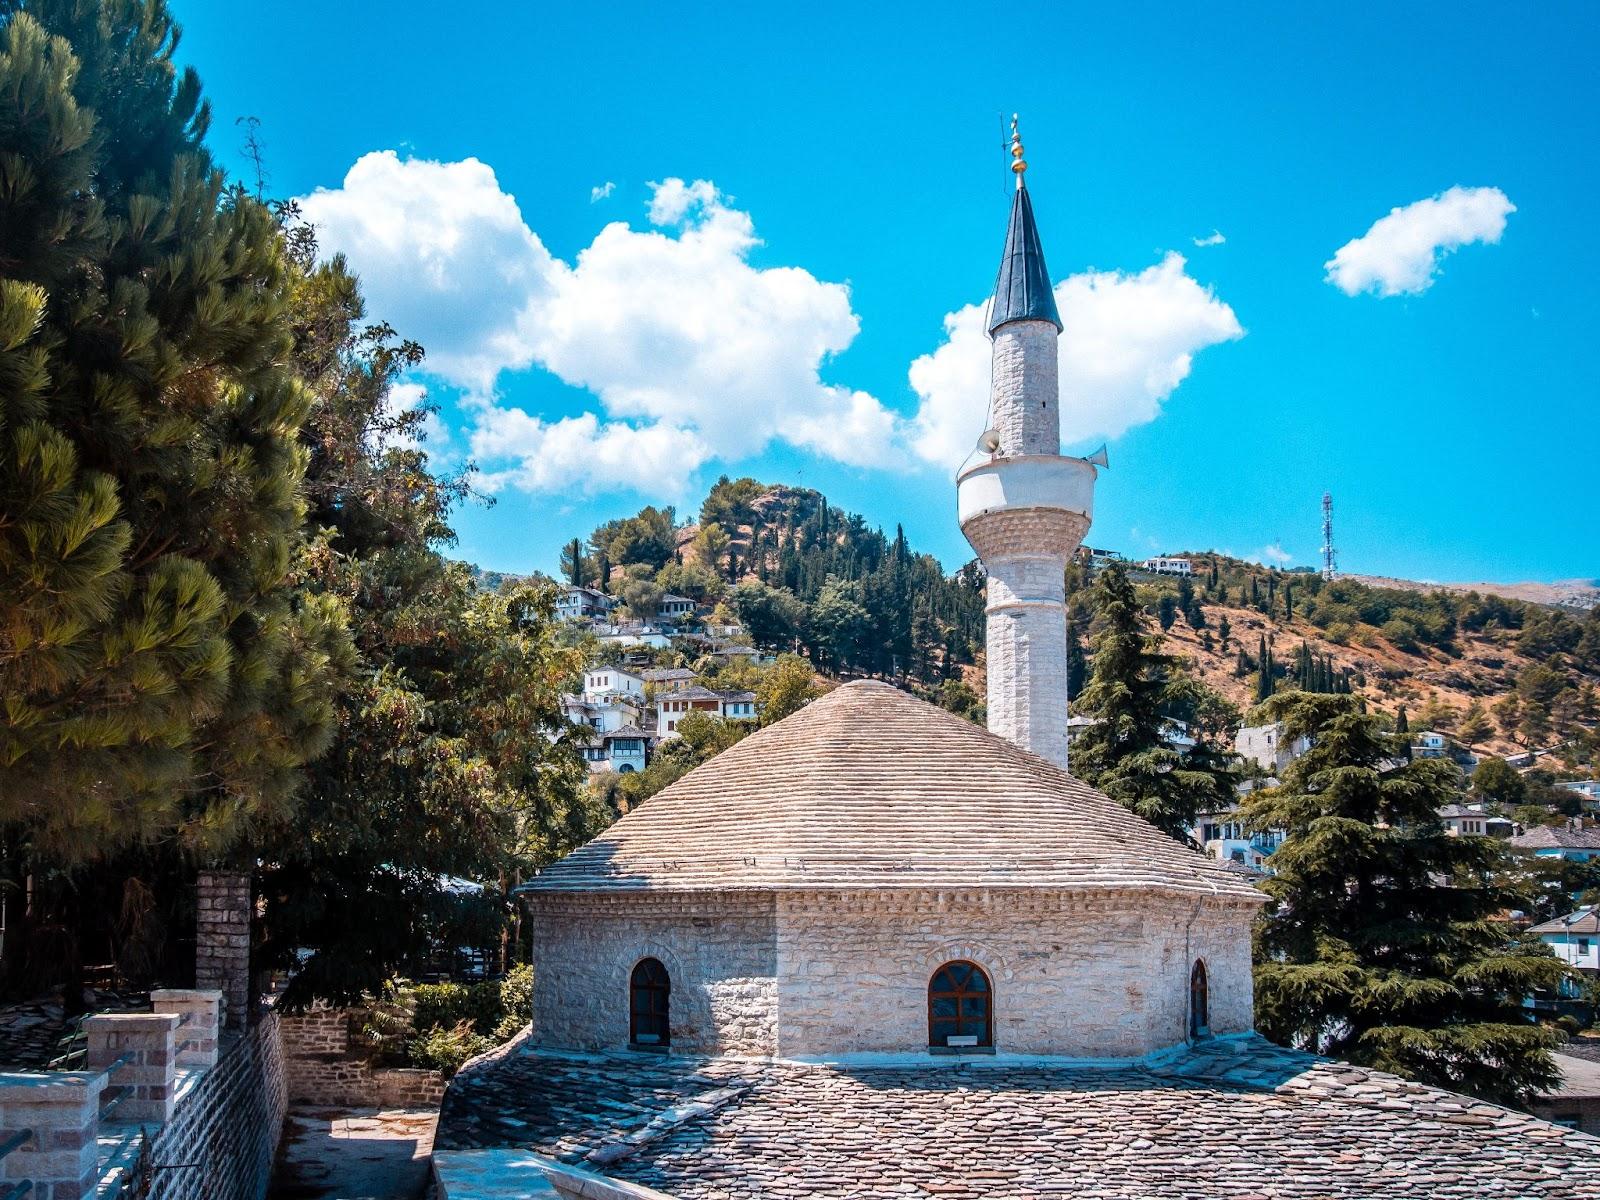 An Albanian church on the side of a hill.